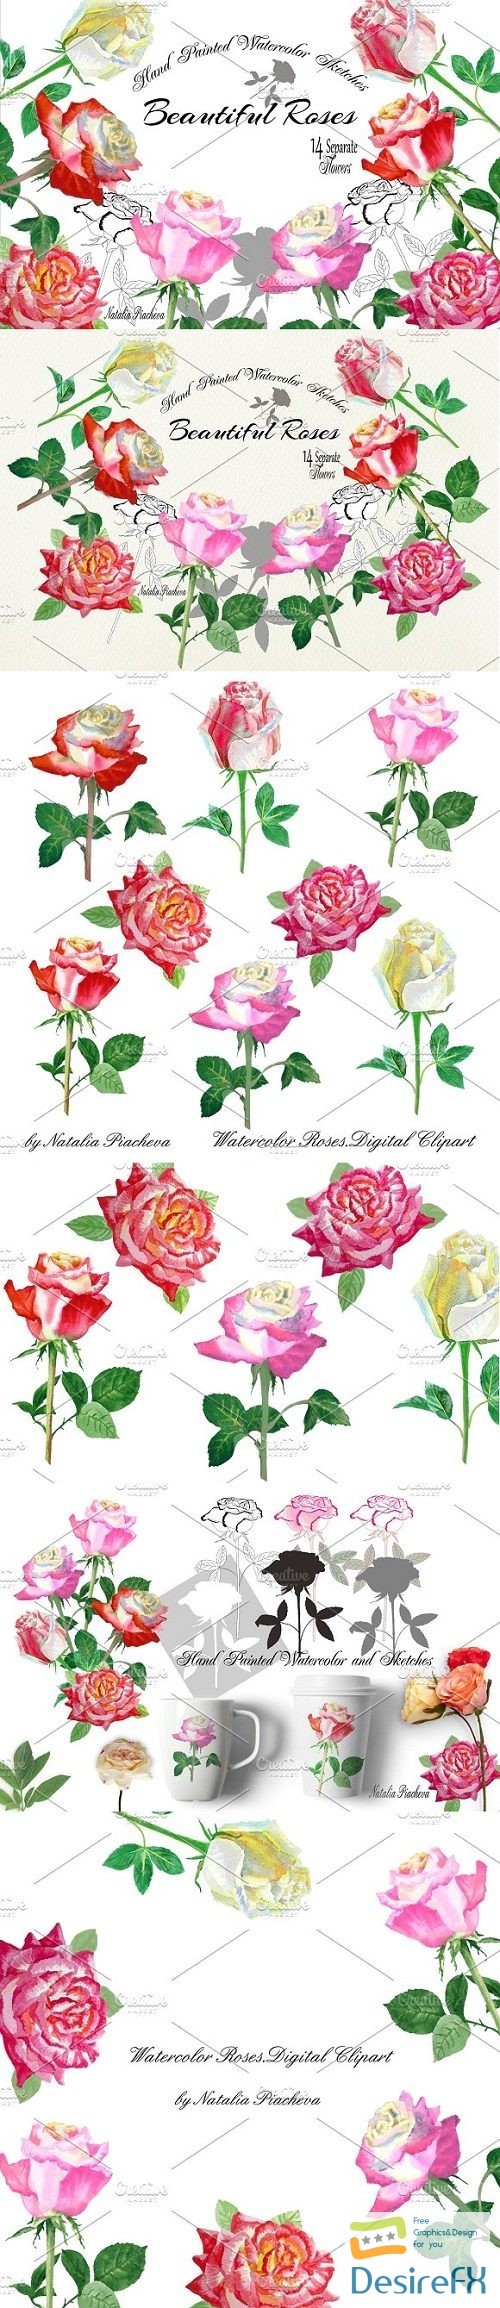 Watercolor Clipart with Roses - 2350502